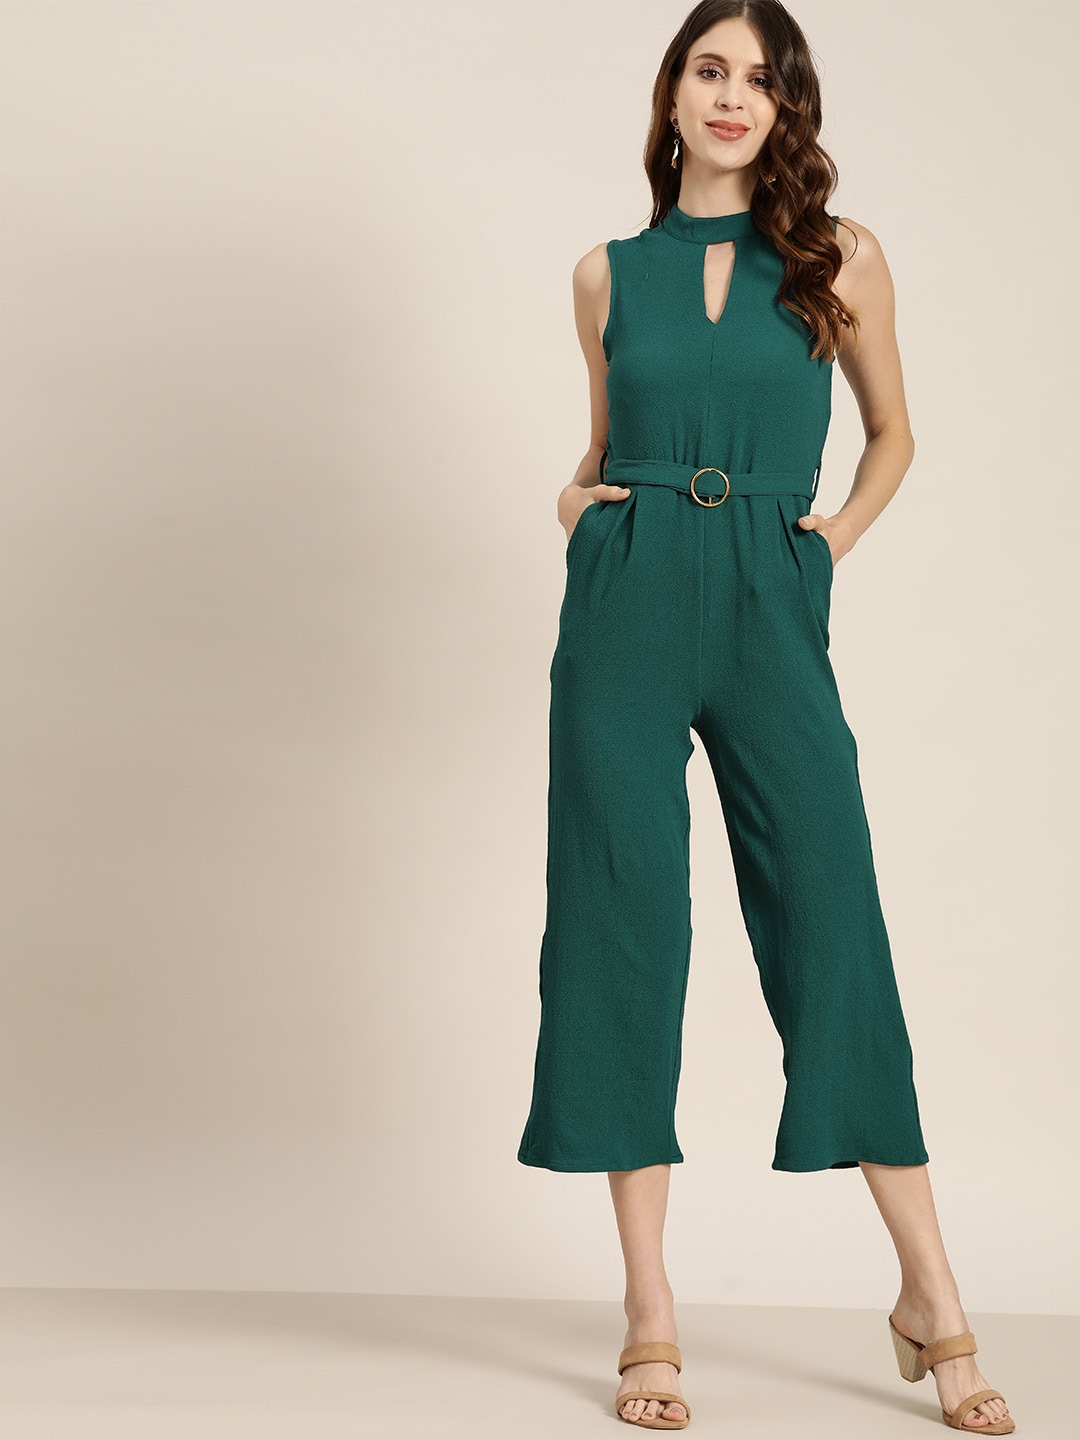 all about you Green Solid Basic Jumpsuit Comes With A Belt Price in India